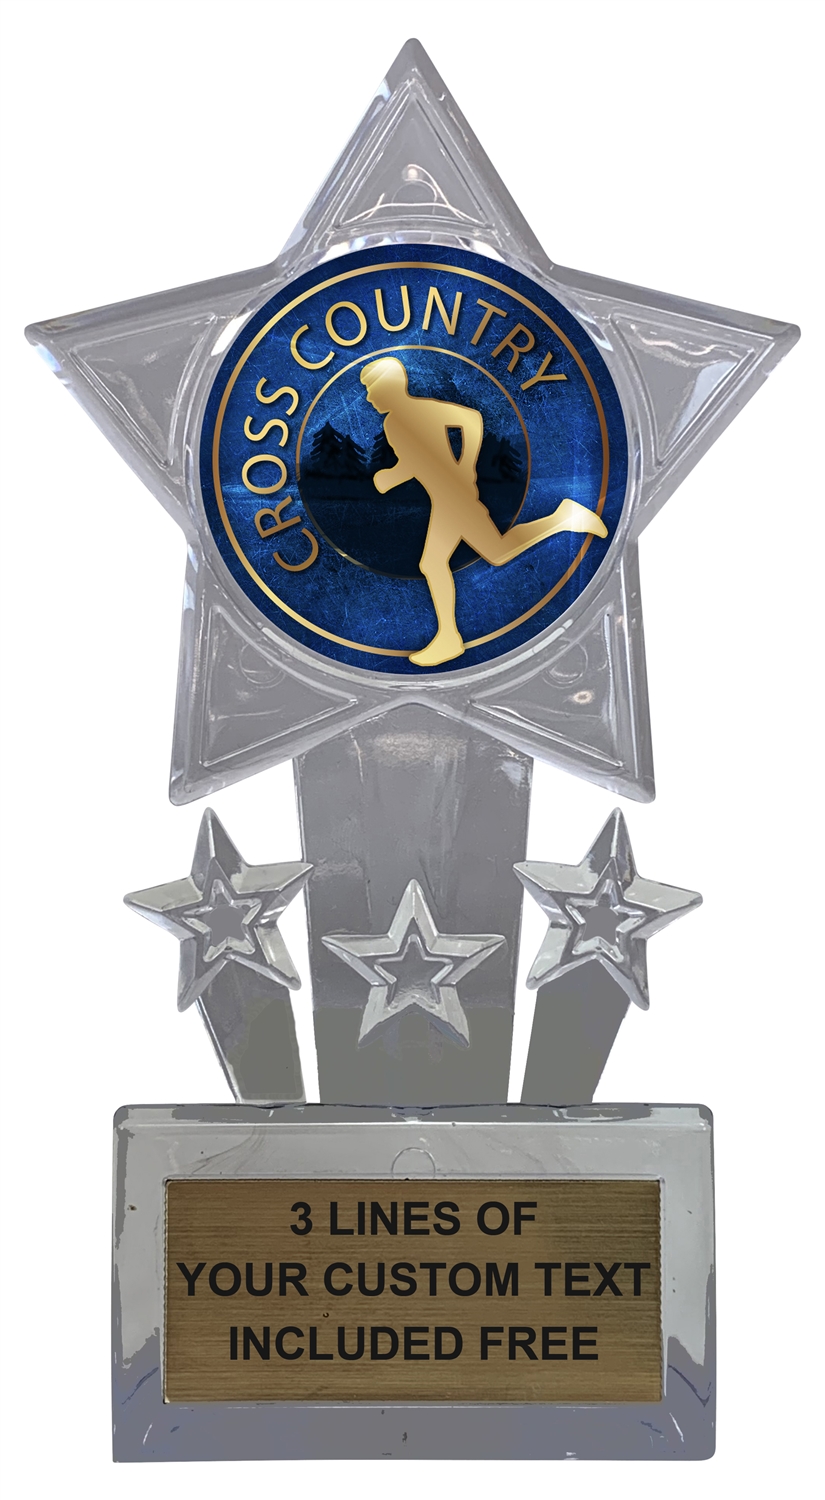 Express Medals Cross Country Snow Ski Award Trophy Party Favor Gift Prize Including 4 Gold Color Decals to Custom Personalize The Black Base